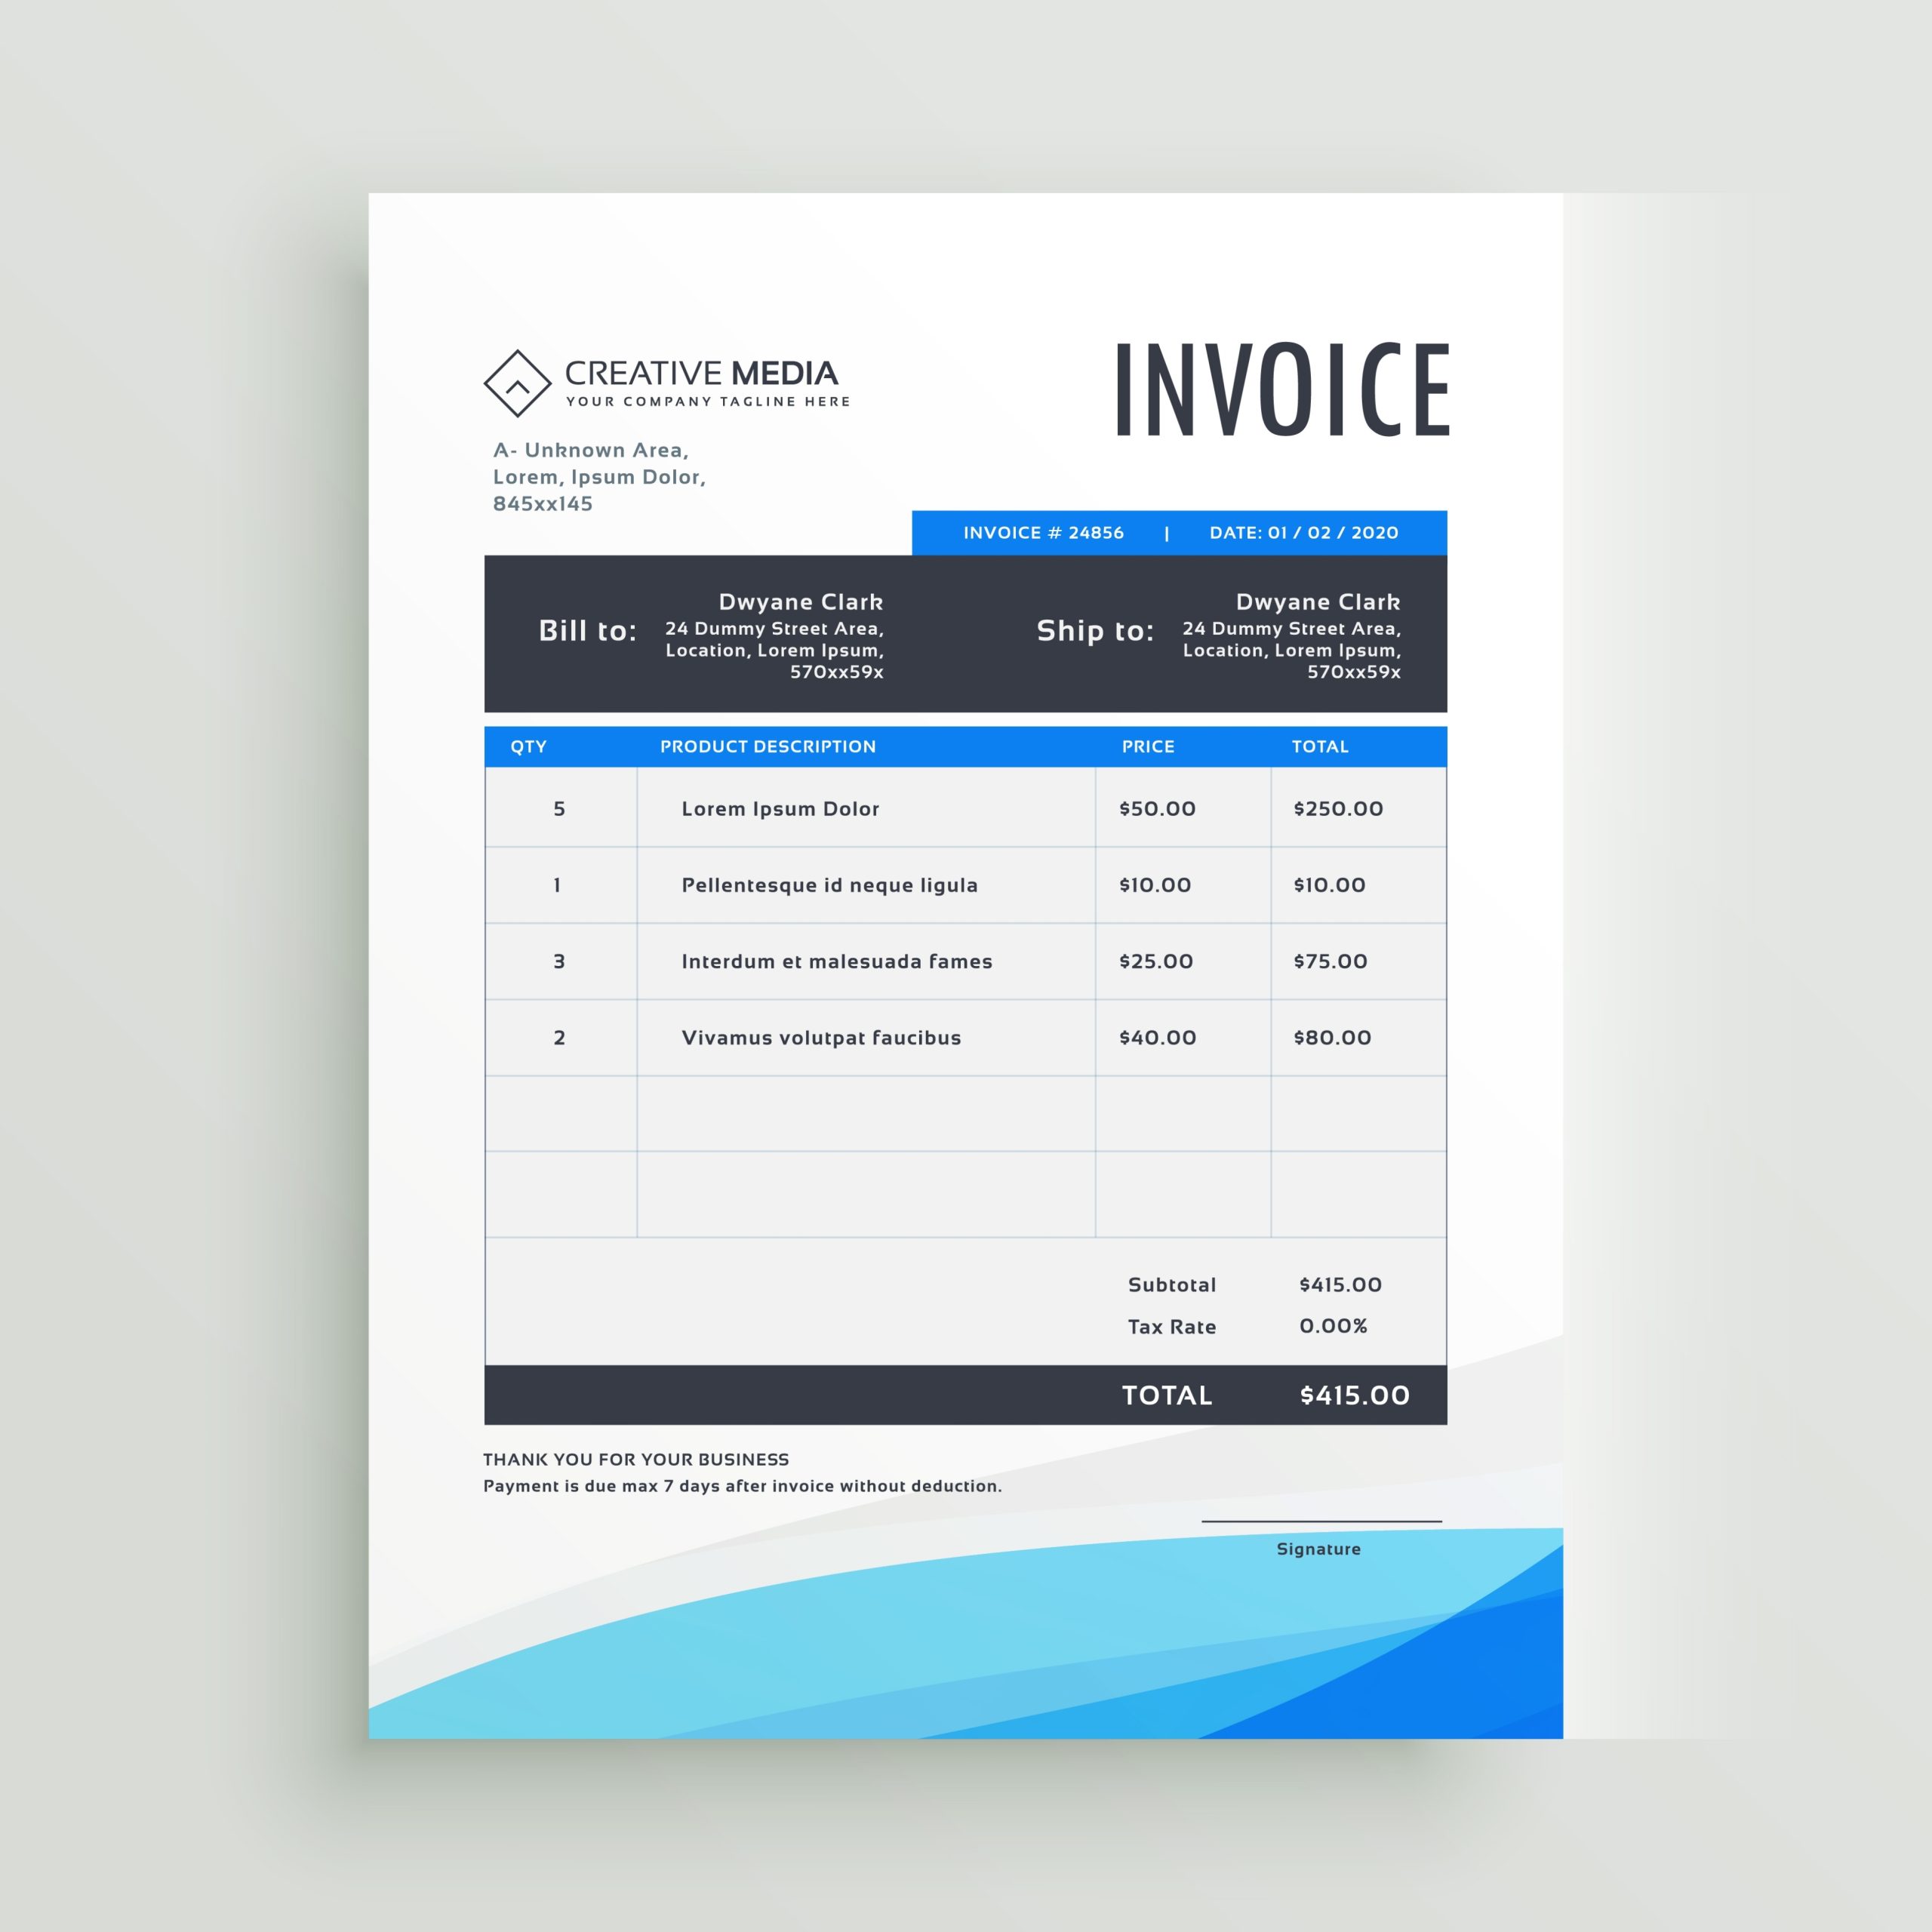 Blue Invoice Template Vector Design - Download Free Vector Art, Stock Graphics & Images Regarding Invoice Template For Designers